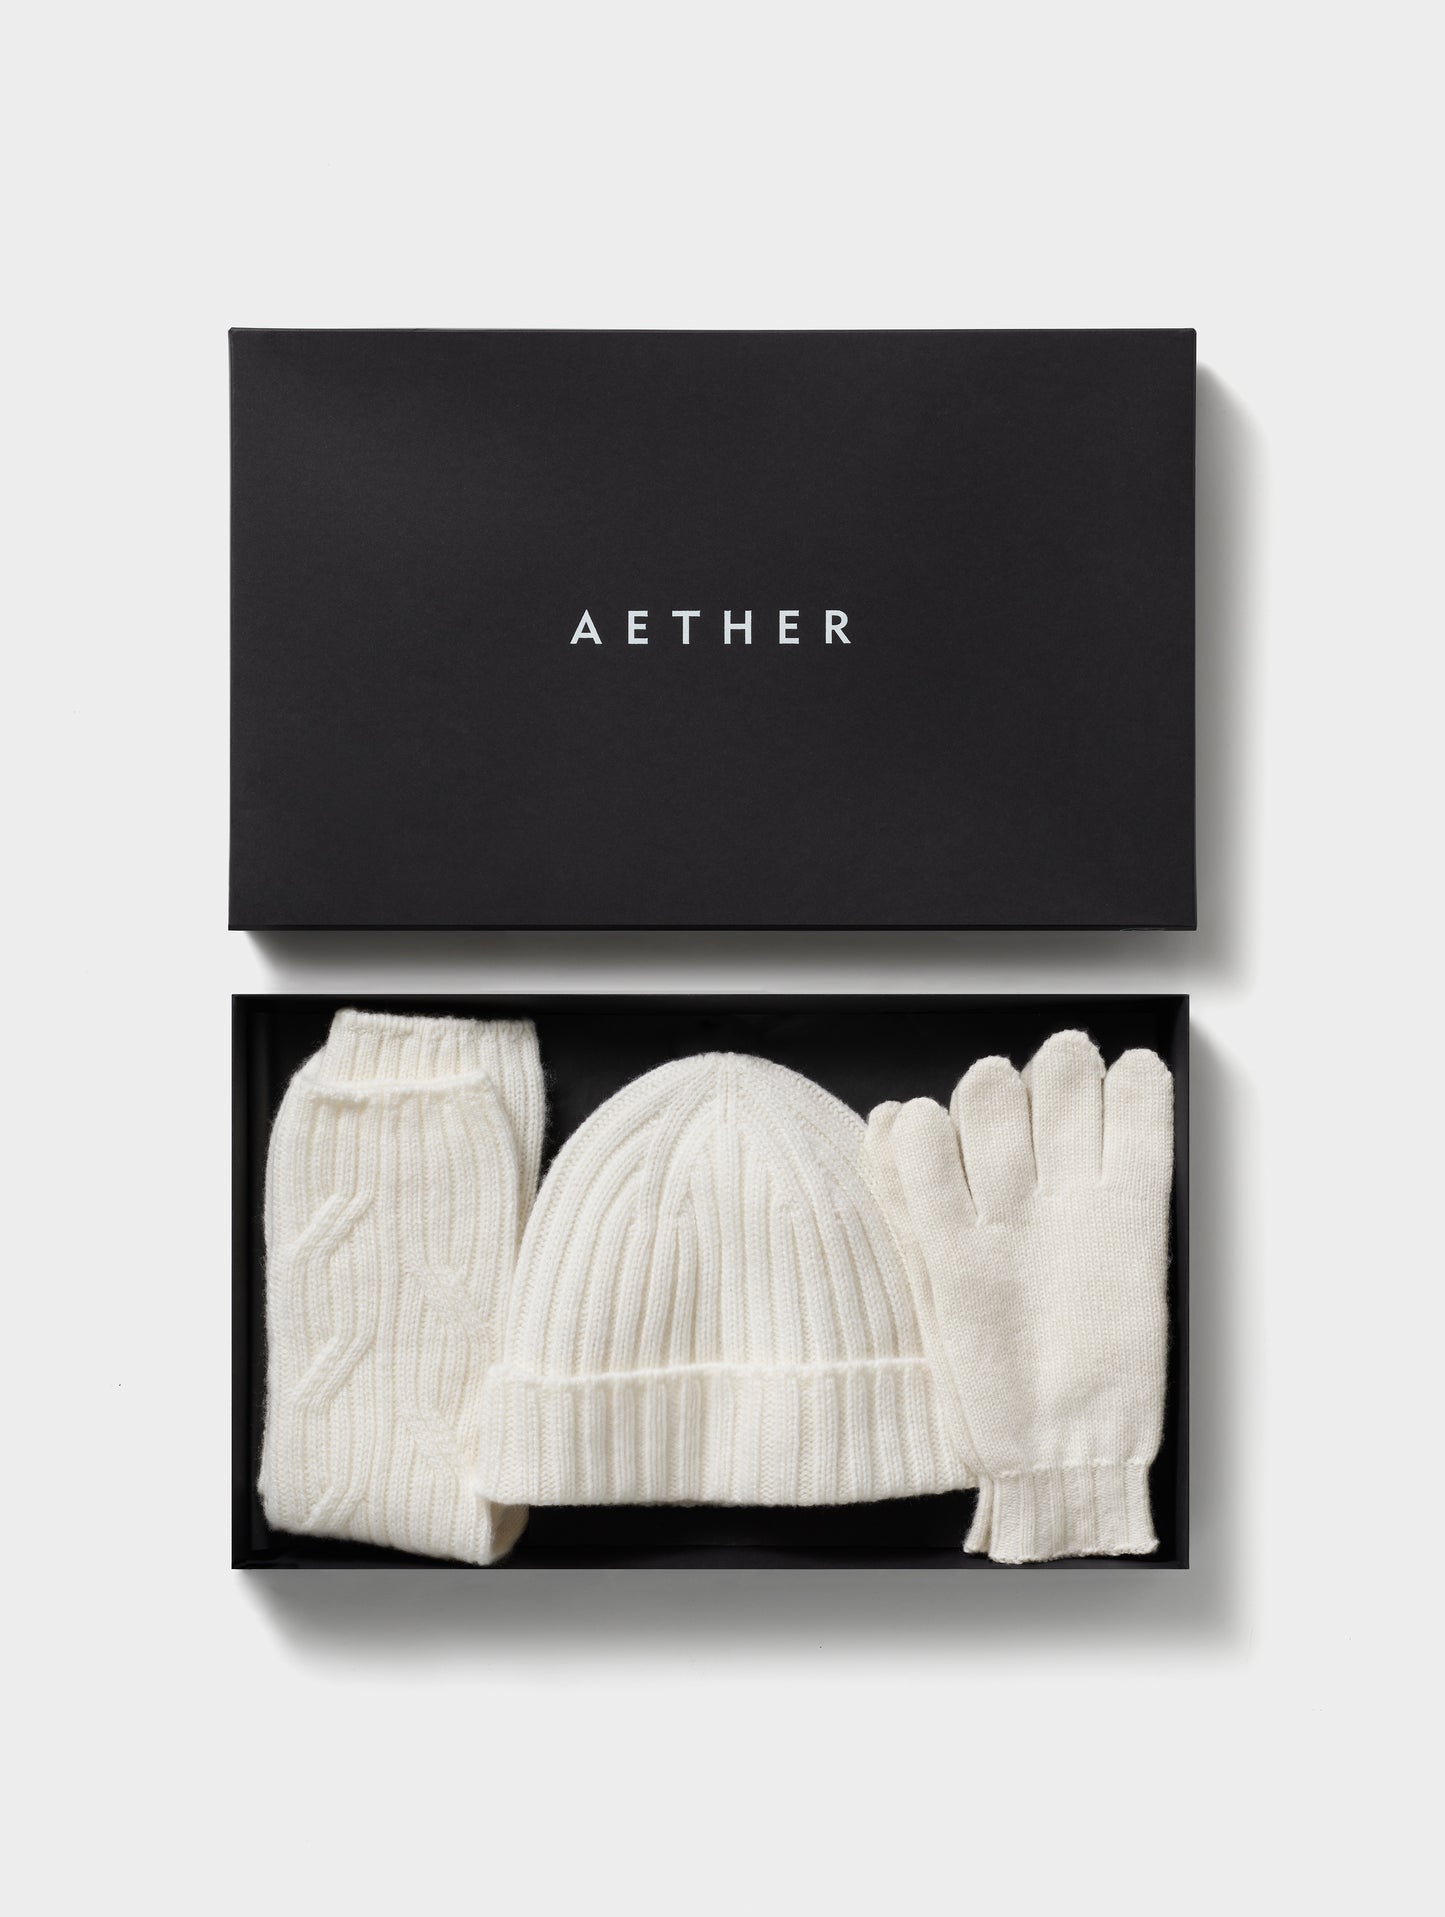 White cashmere hat, socks, and gloves from AETHER Apparel